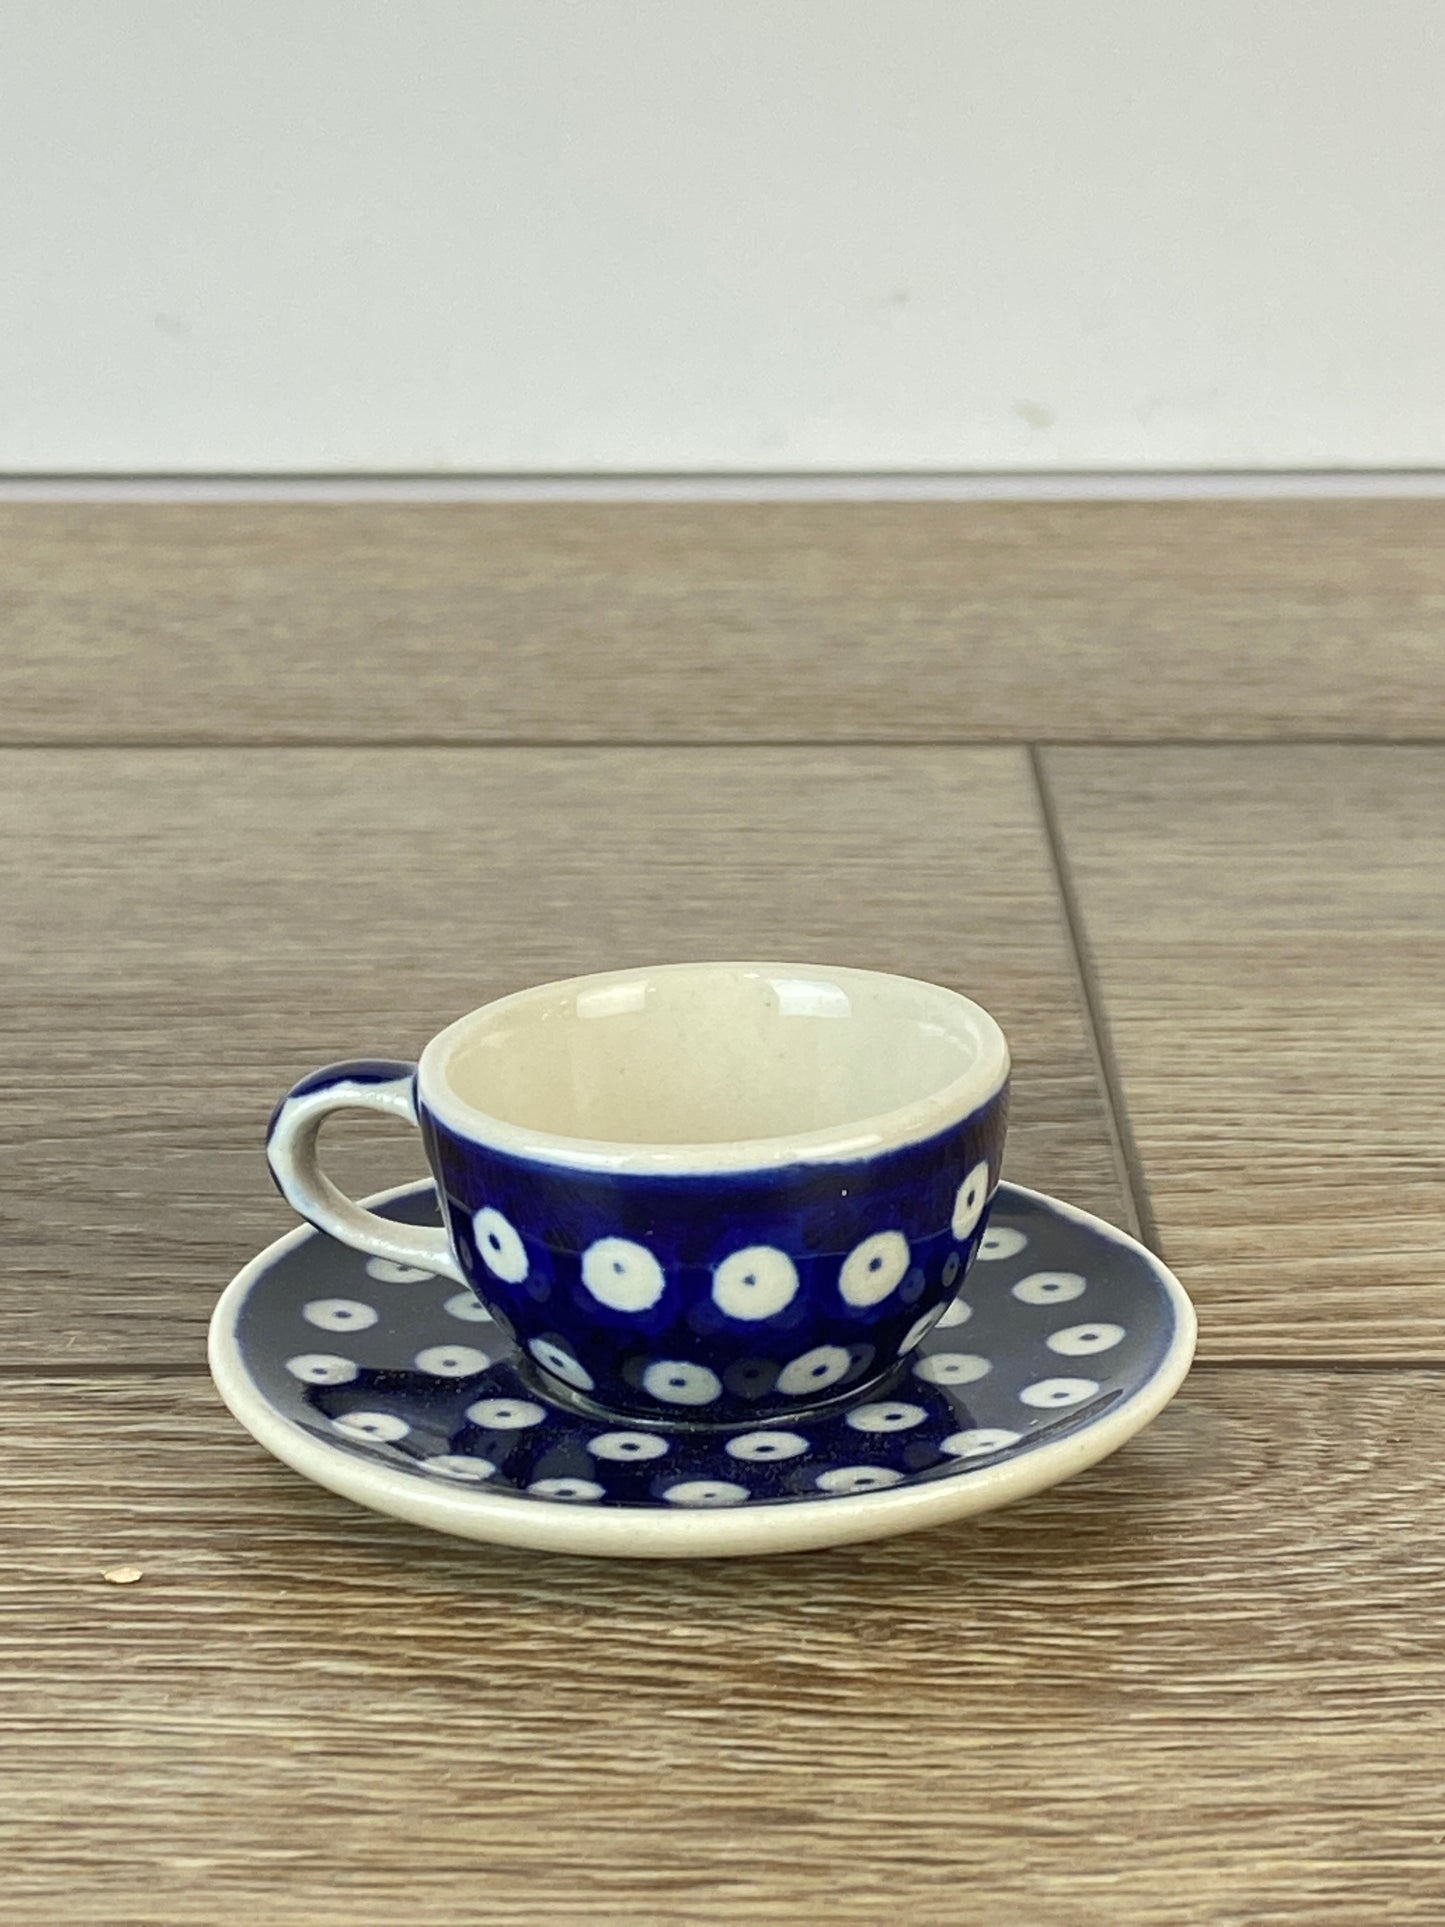 Mini Teacup and Saucer Ornament - Shape F89 - Pattern 70a